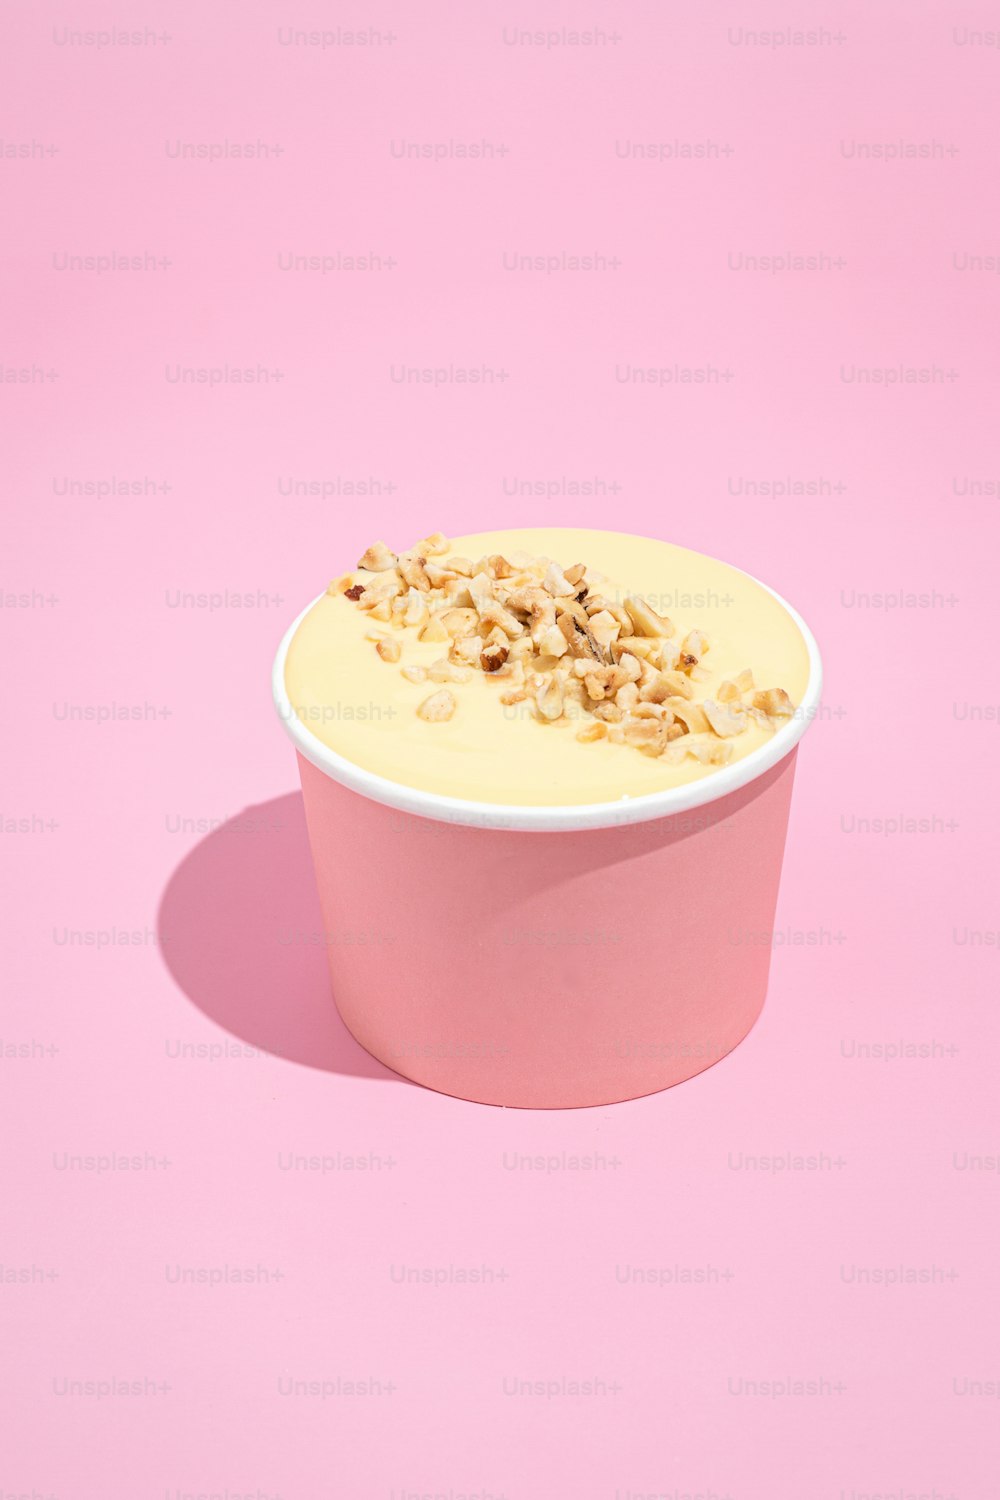 a bowl of cereal on a pink background